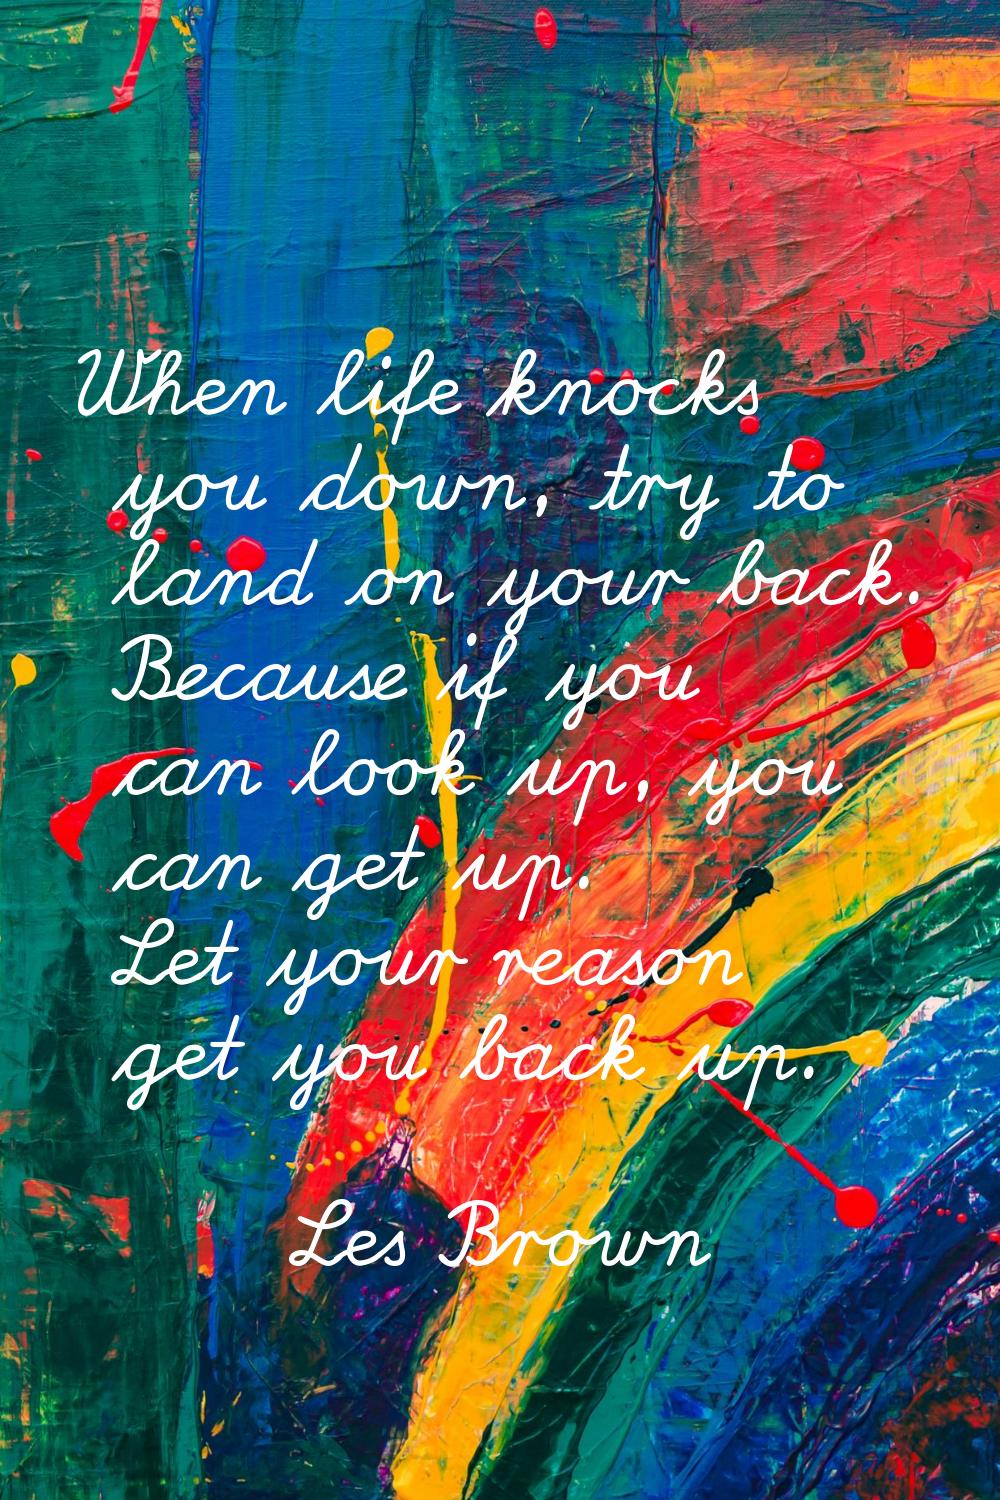 When life knocks you down, try to land on your back. Because if you can look up, you can get up. Le